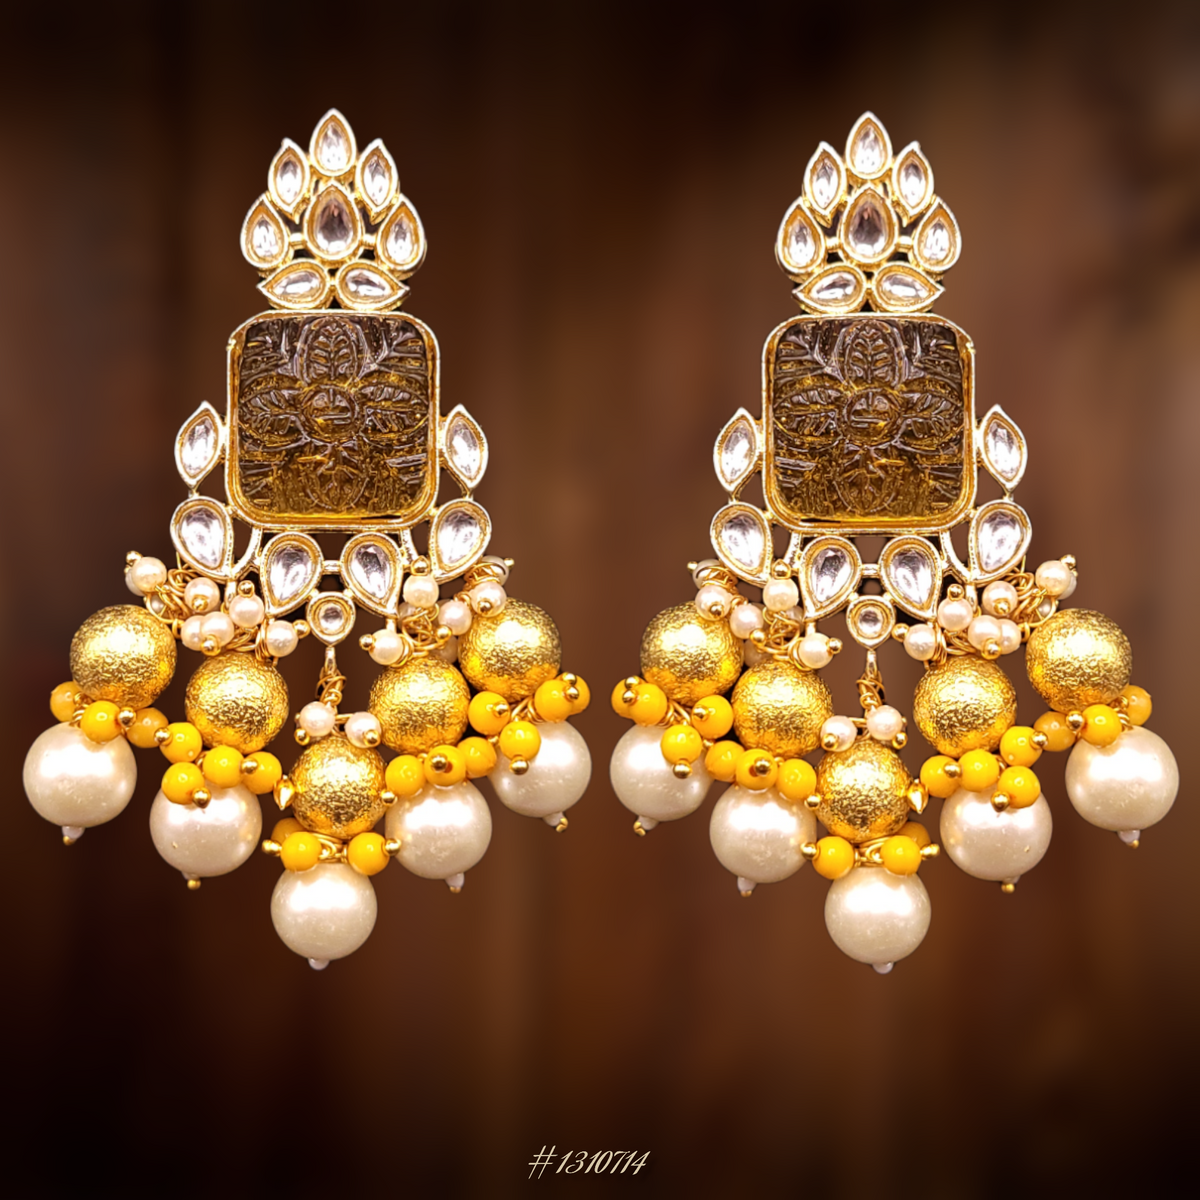 EYE CATCHING BEADED EARRINGS WITH STONE & PEARLS